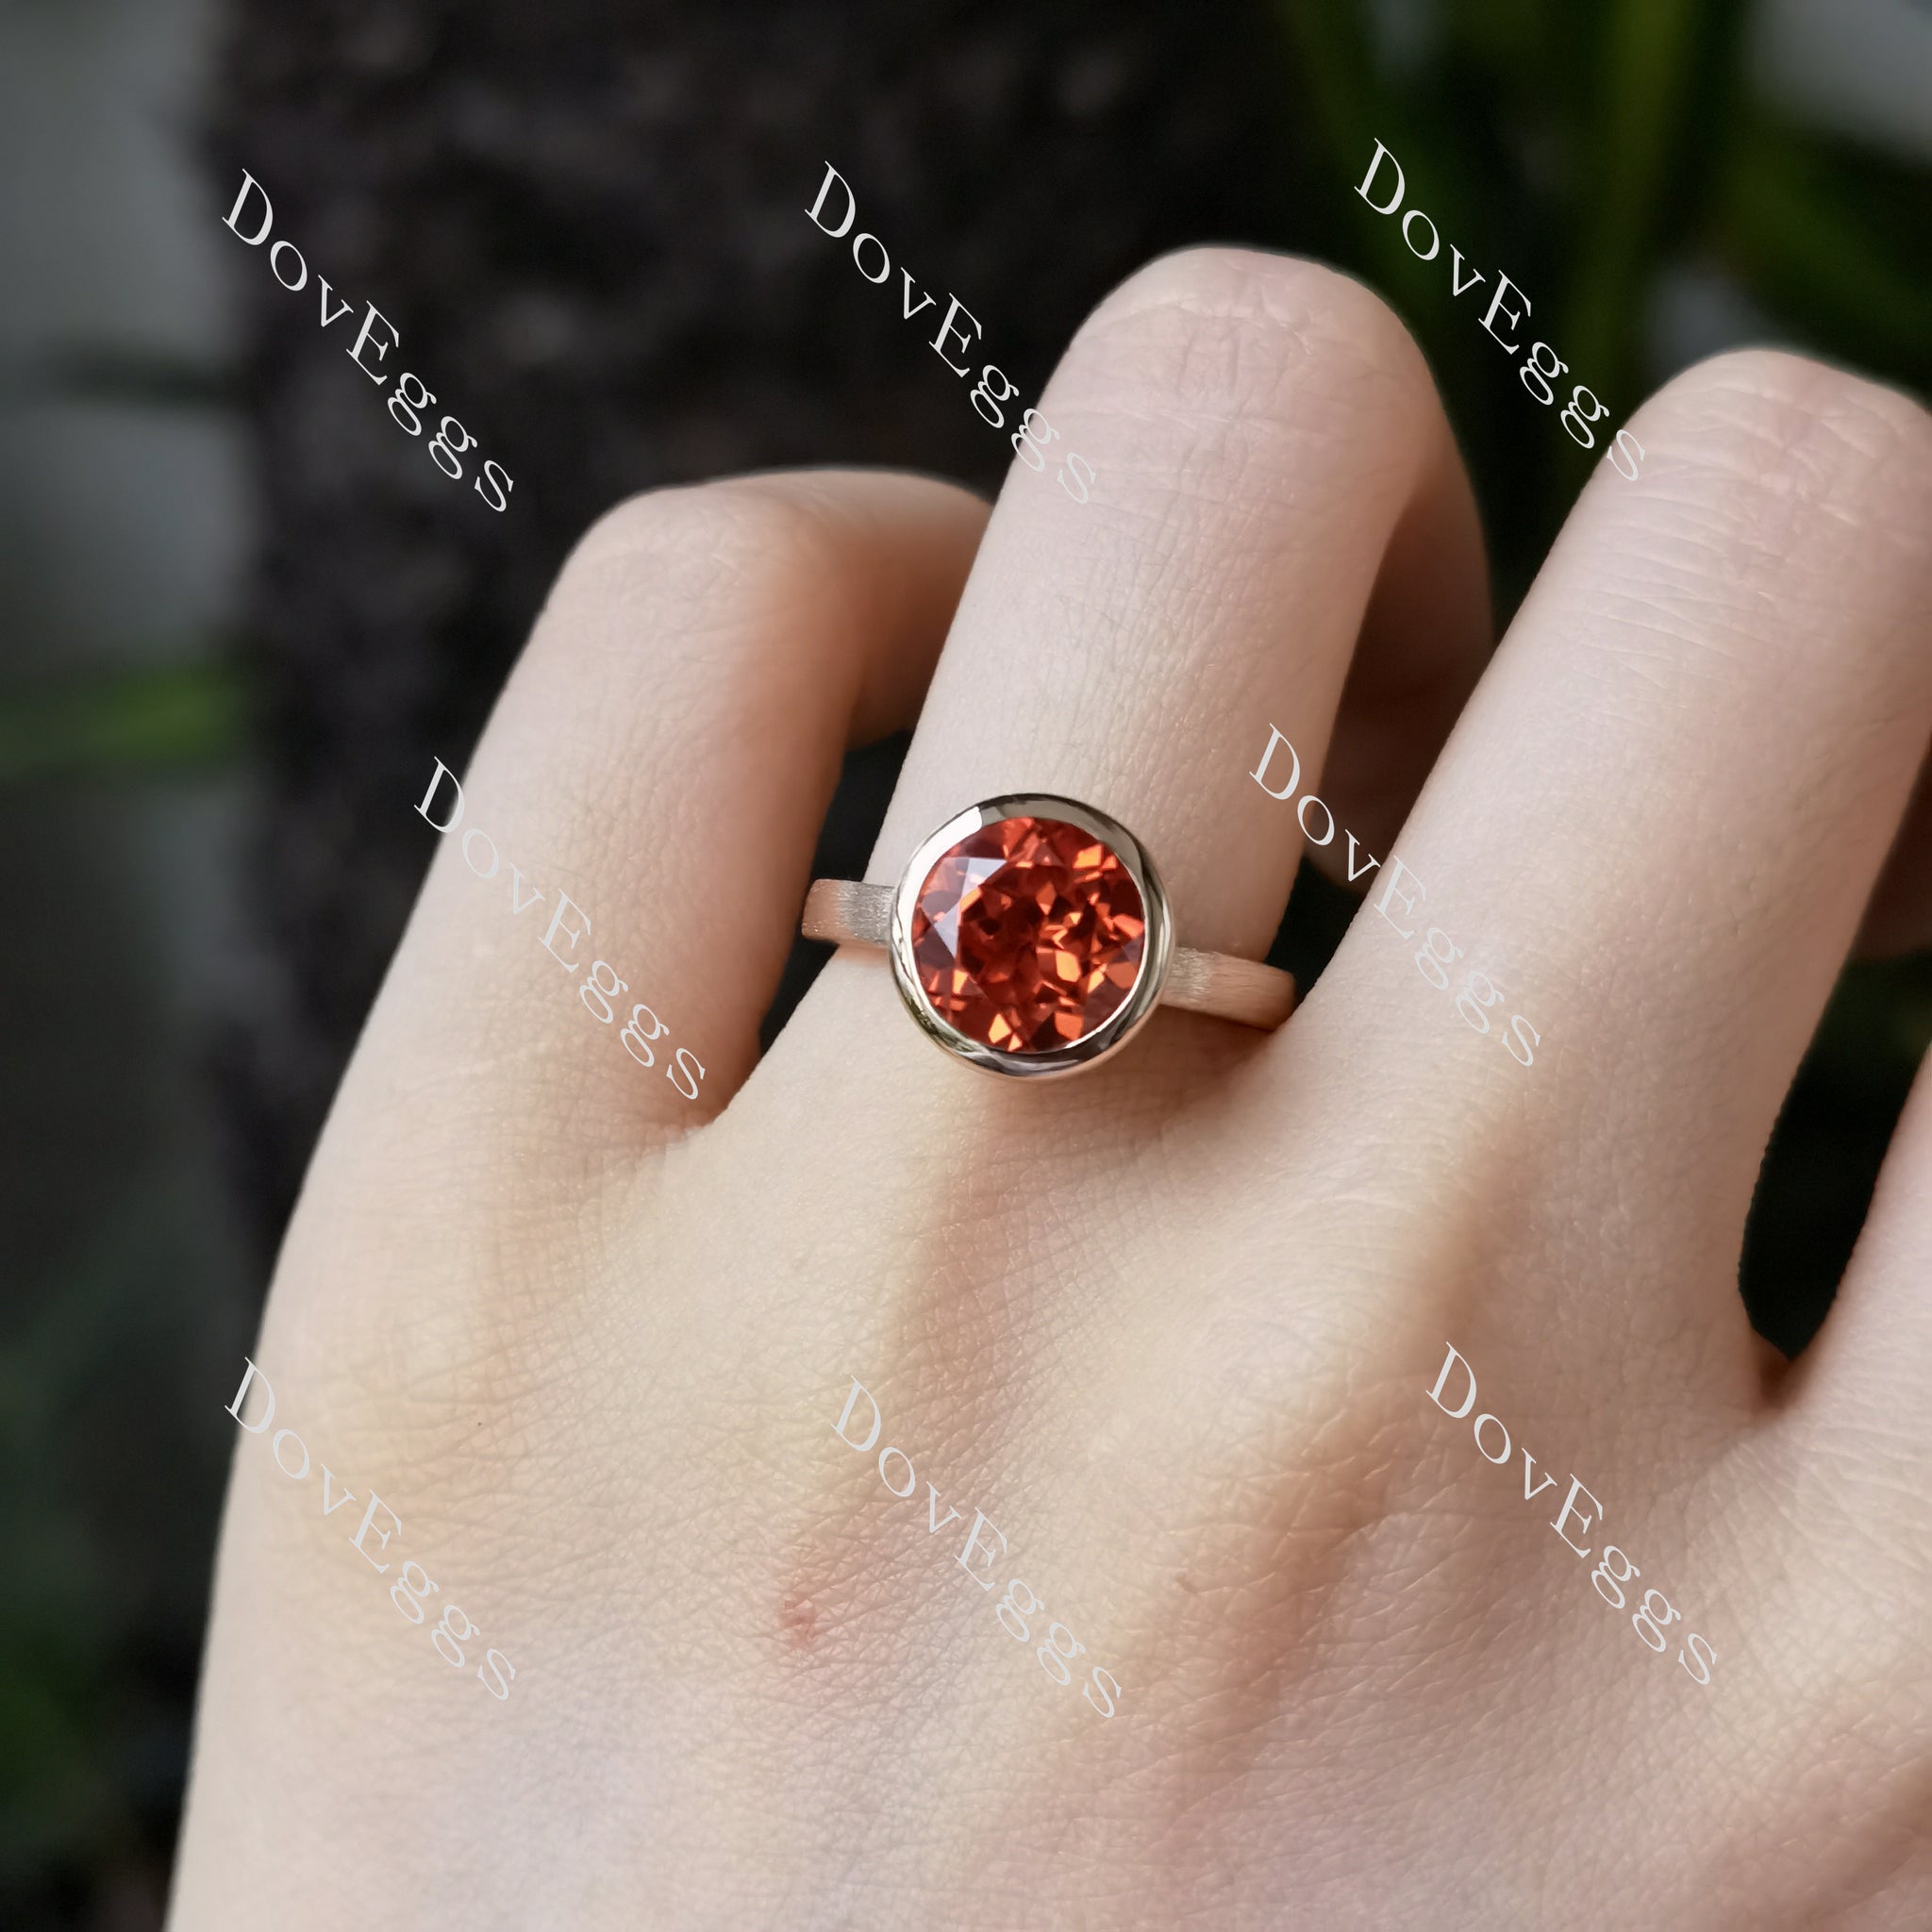 Doveggs round bezel textured vivid pegion blood ruby colored gem engagement ring